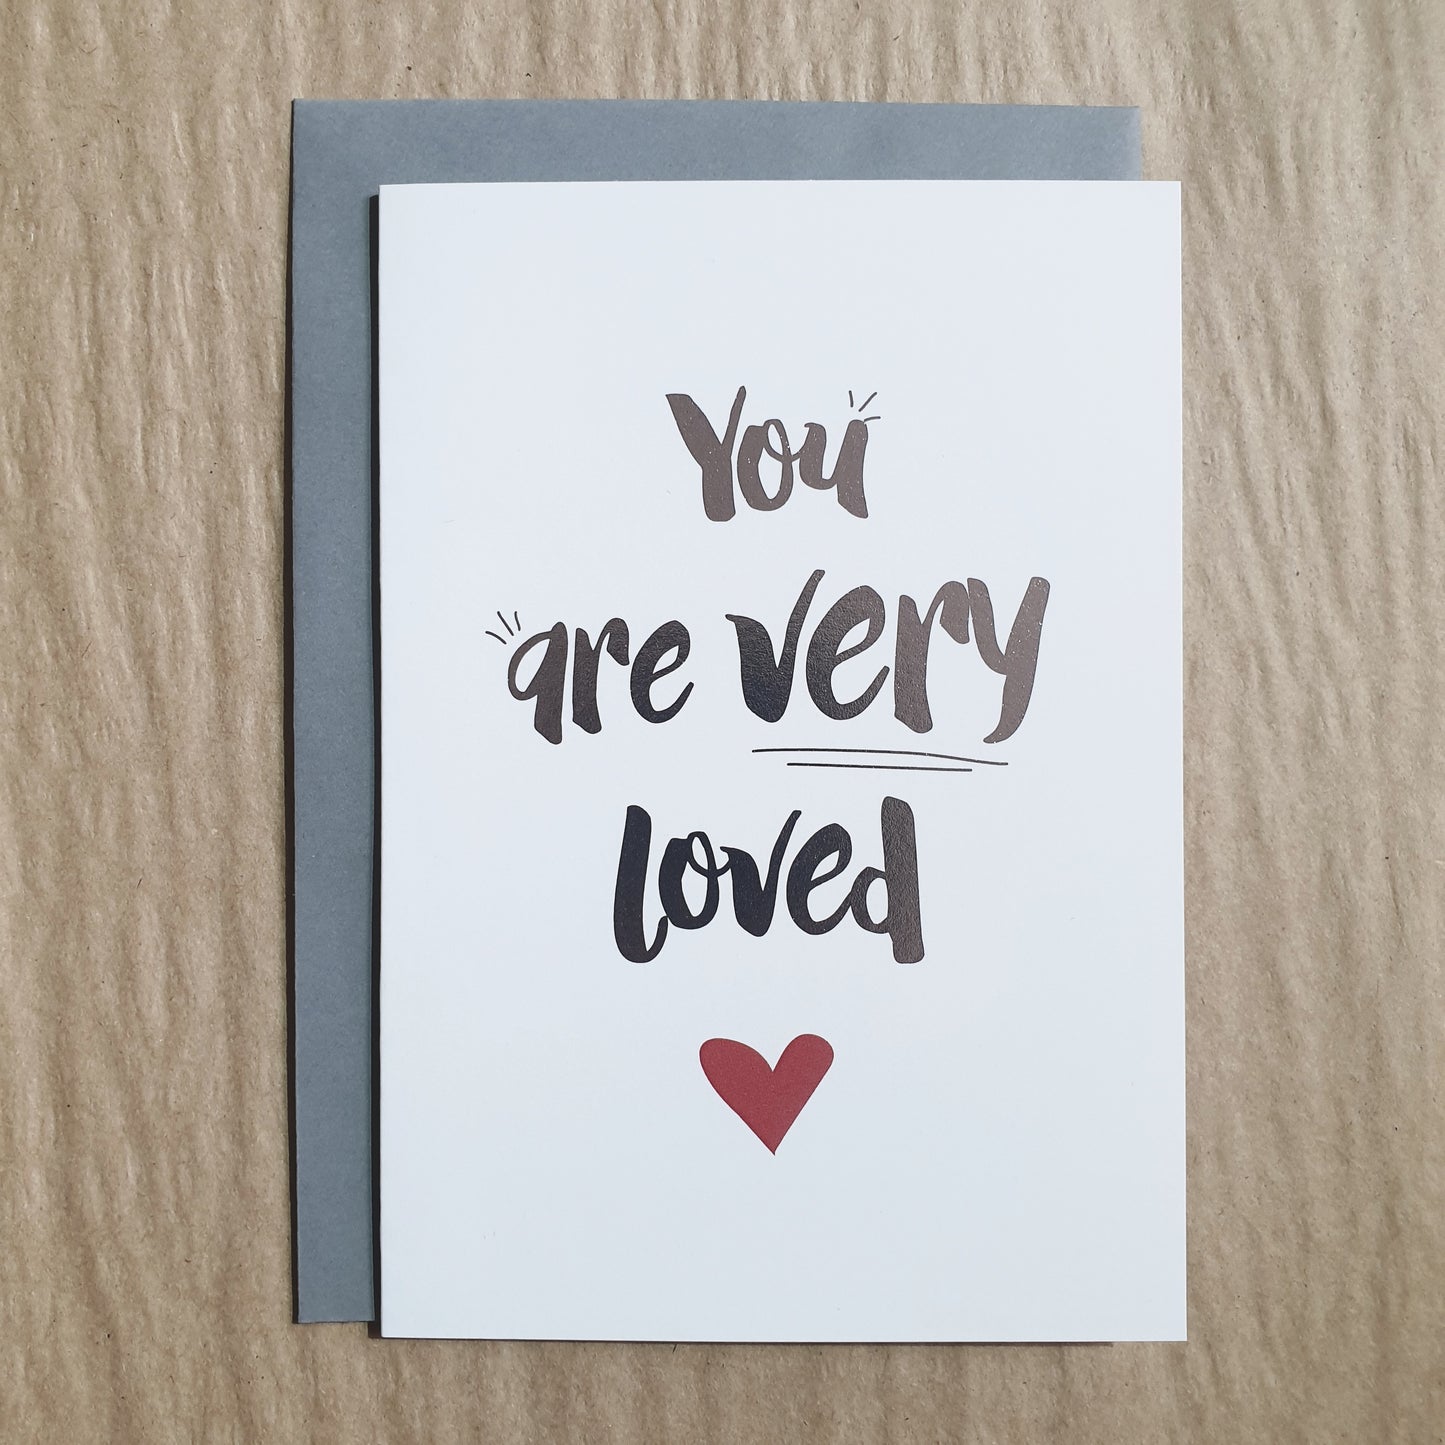 You are very loved - Card